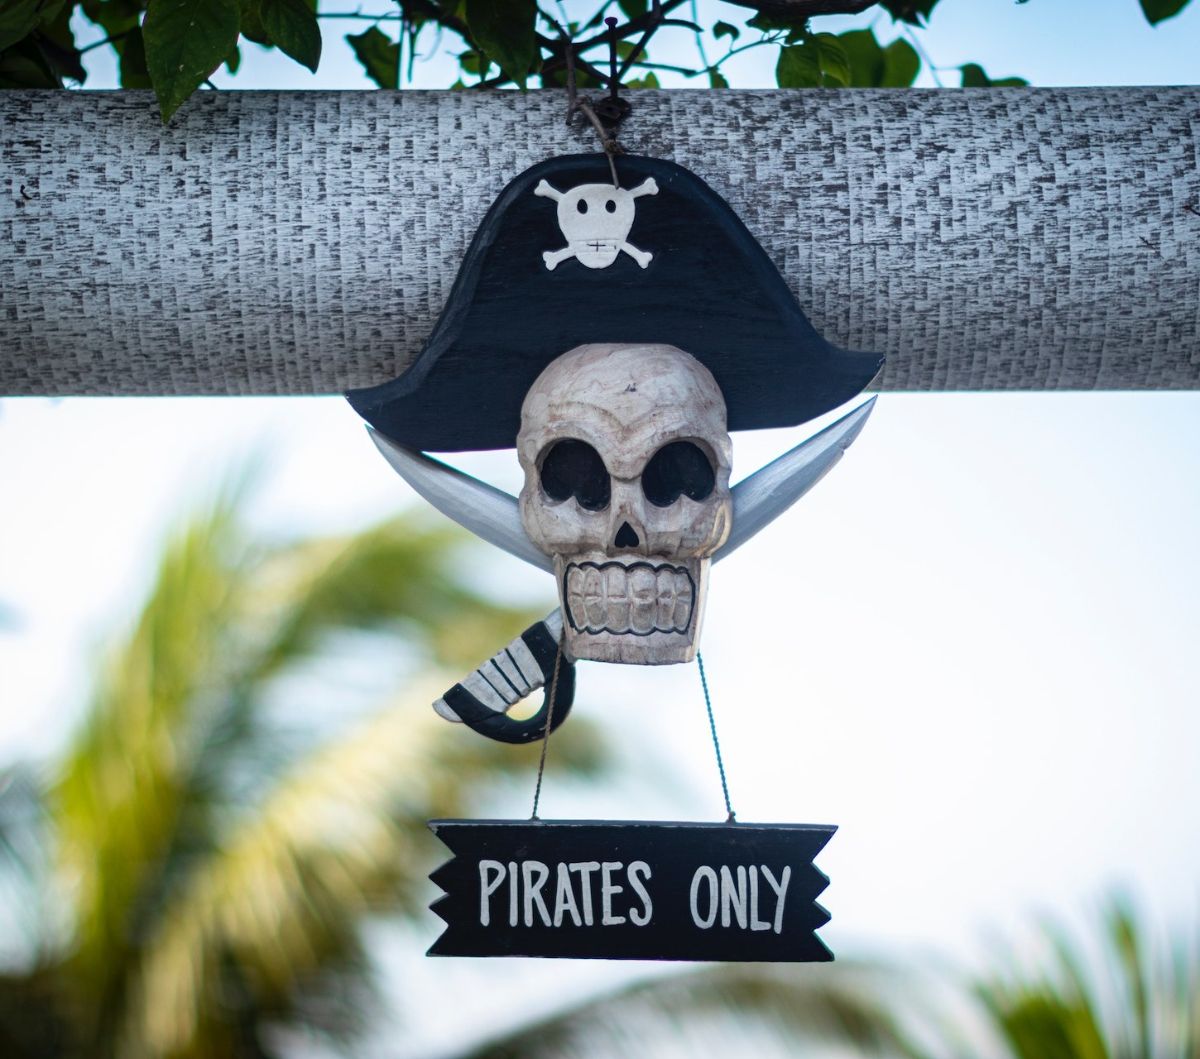 45 Pirate Quotes Funny, Boost Your Joy Imagination On The Sea